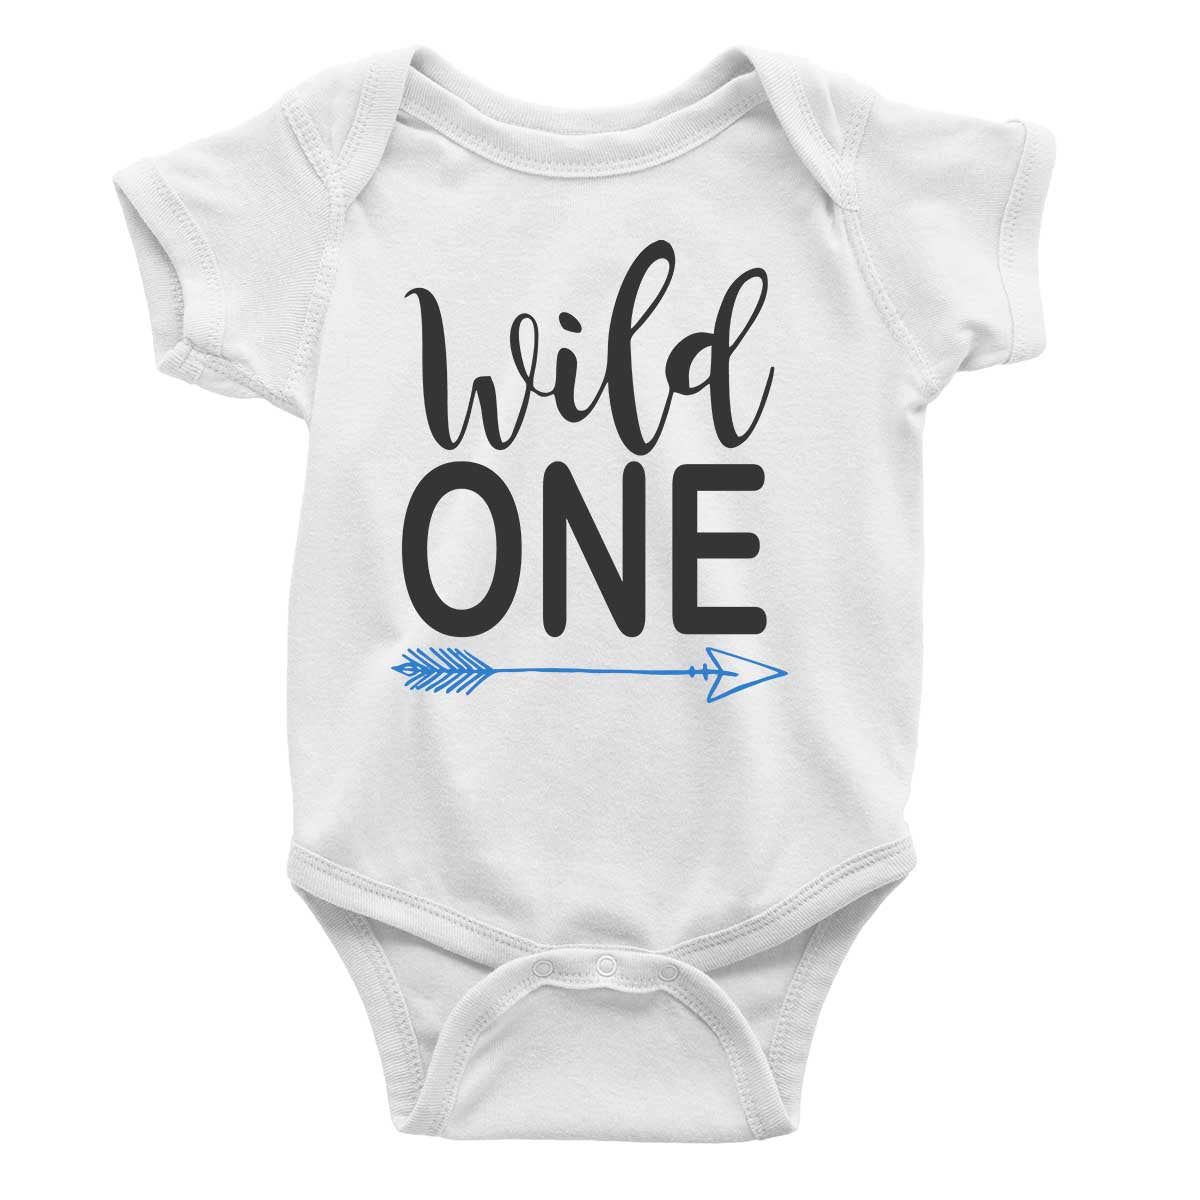 wild one rompers white